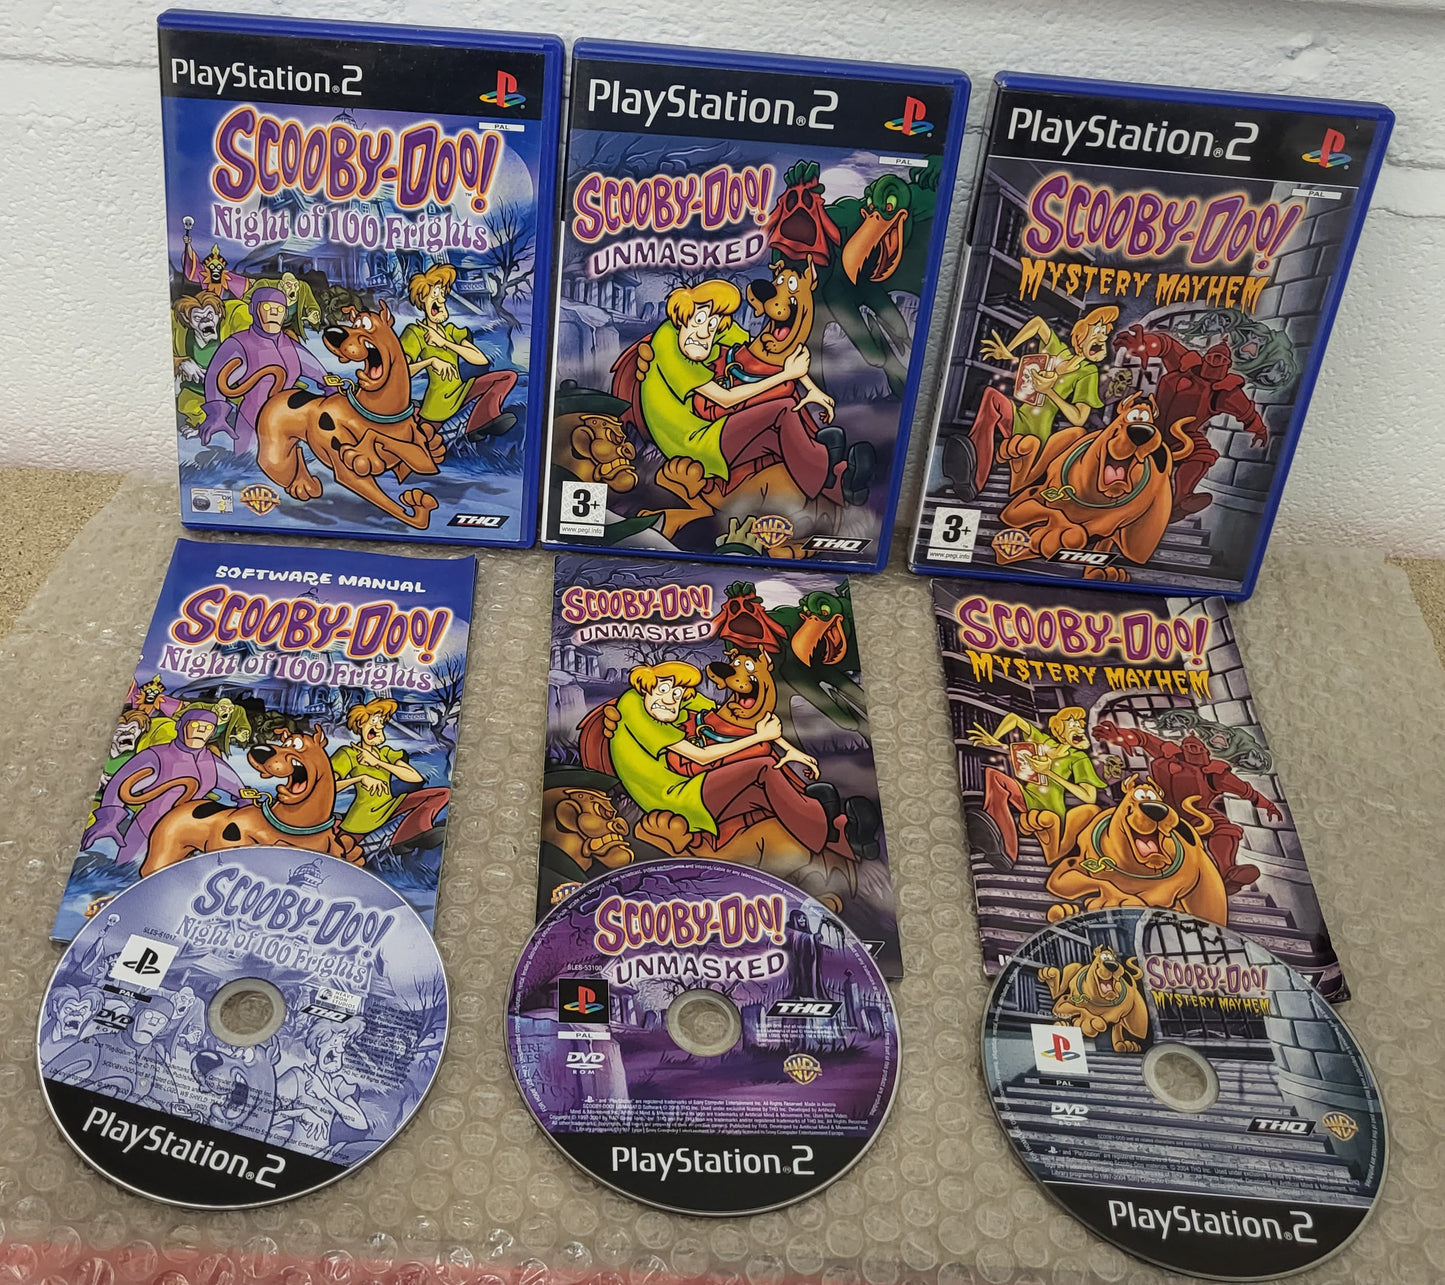 Scooby Doo x 3 Sony Playstation 2 (PS2) Game Bundle